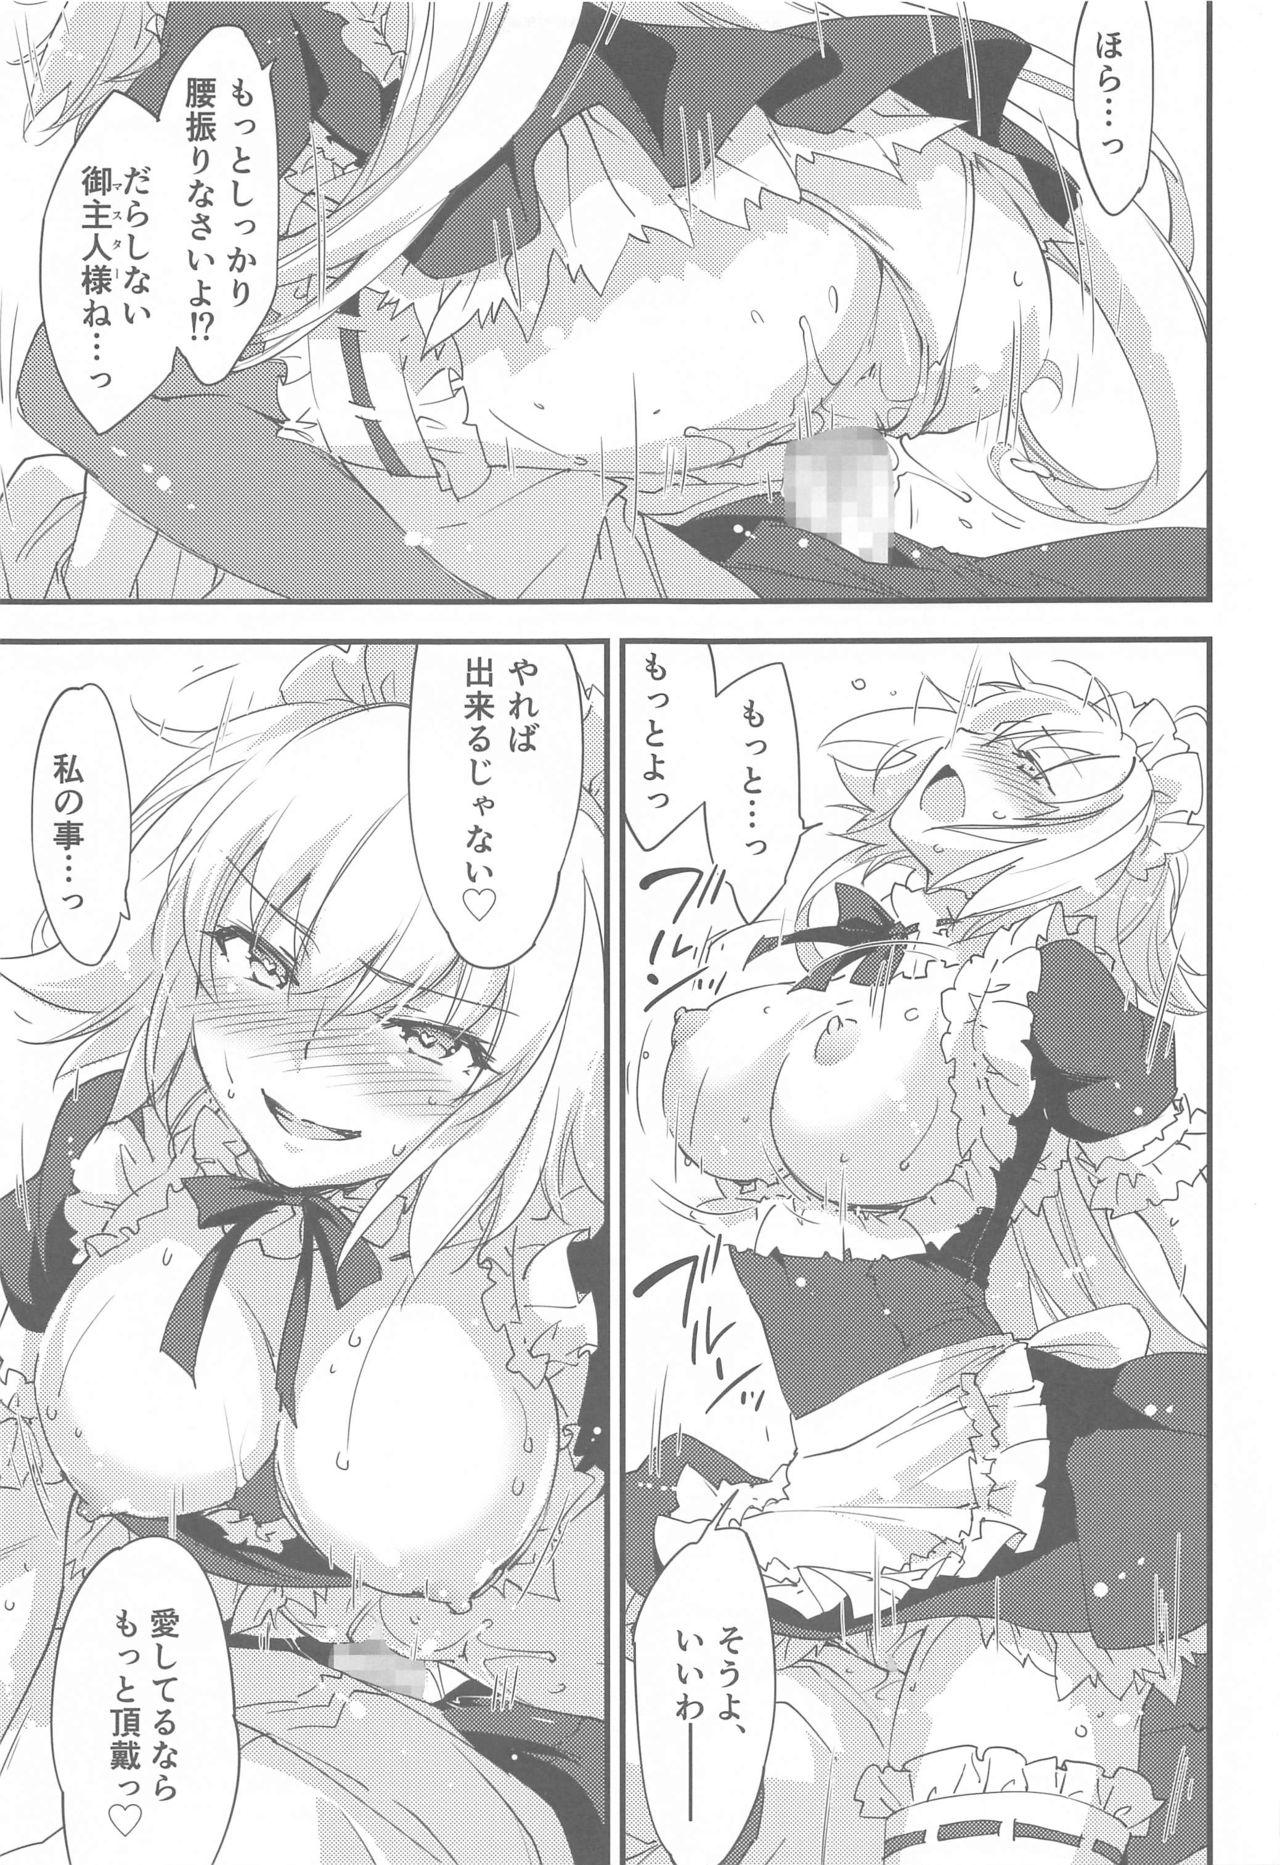 Teenage Gohoushi Maid Jeanne-chan - Fate grand order 18 Year Old - Page 24